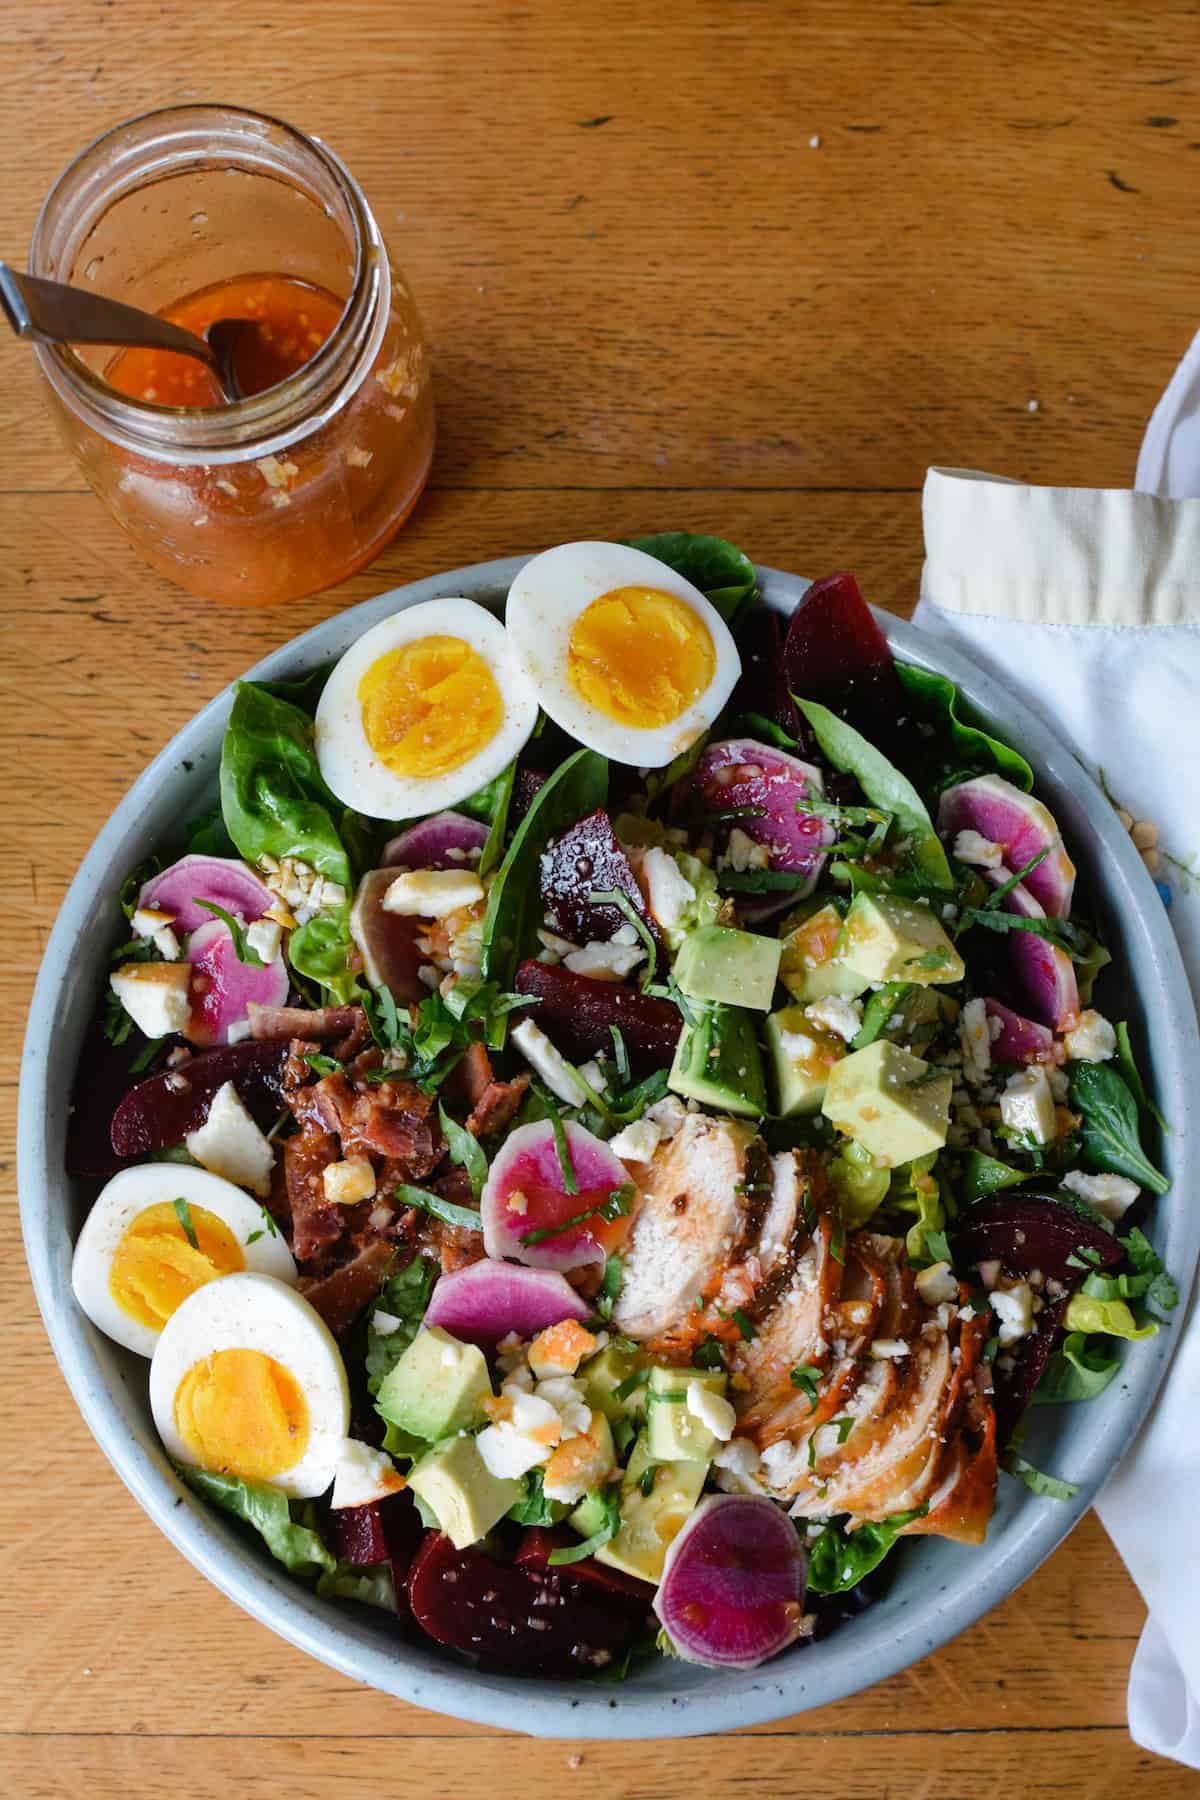 Autumn Harvest Cobb salad recipe with roasted beets and watermelon radish tossed in a tangy red wine vinegar dressing with smoked paprika, shallots and mustard. Top with crumbled feta, or keep it dairy-free! #cobbsalad #cobbsaladrecipe #fallsalad #salad